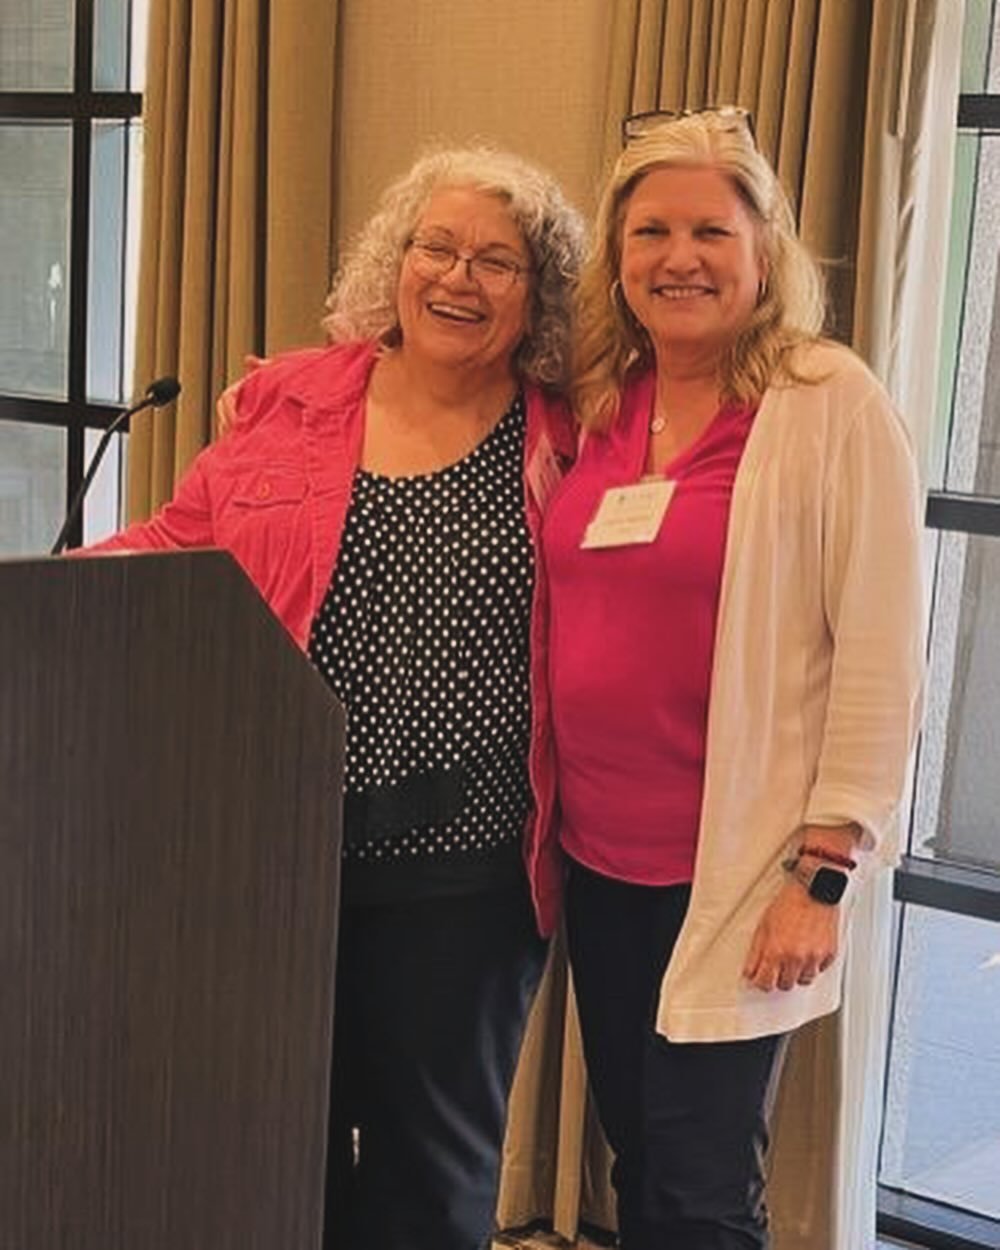 Founding Institute leaders Janet Horras and Laurel Aparicio join state home visiting leaders celebrating 10 years of ASTHVI and sharing new Institute resources. ❤️

#HomeVisitingWorks #homevisiting #familysupportprofessional